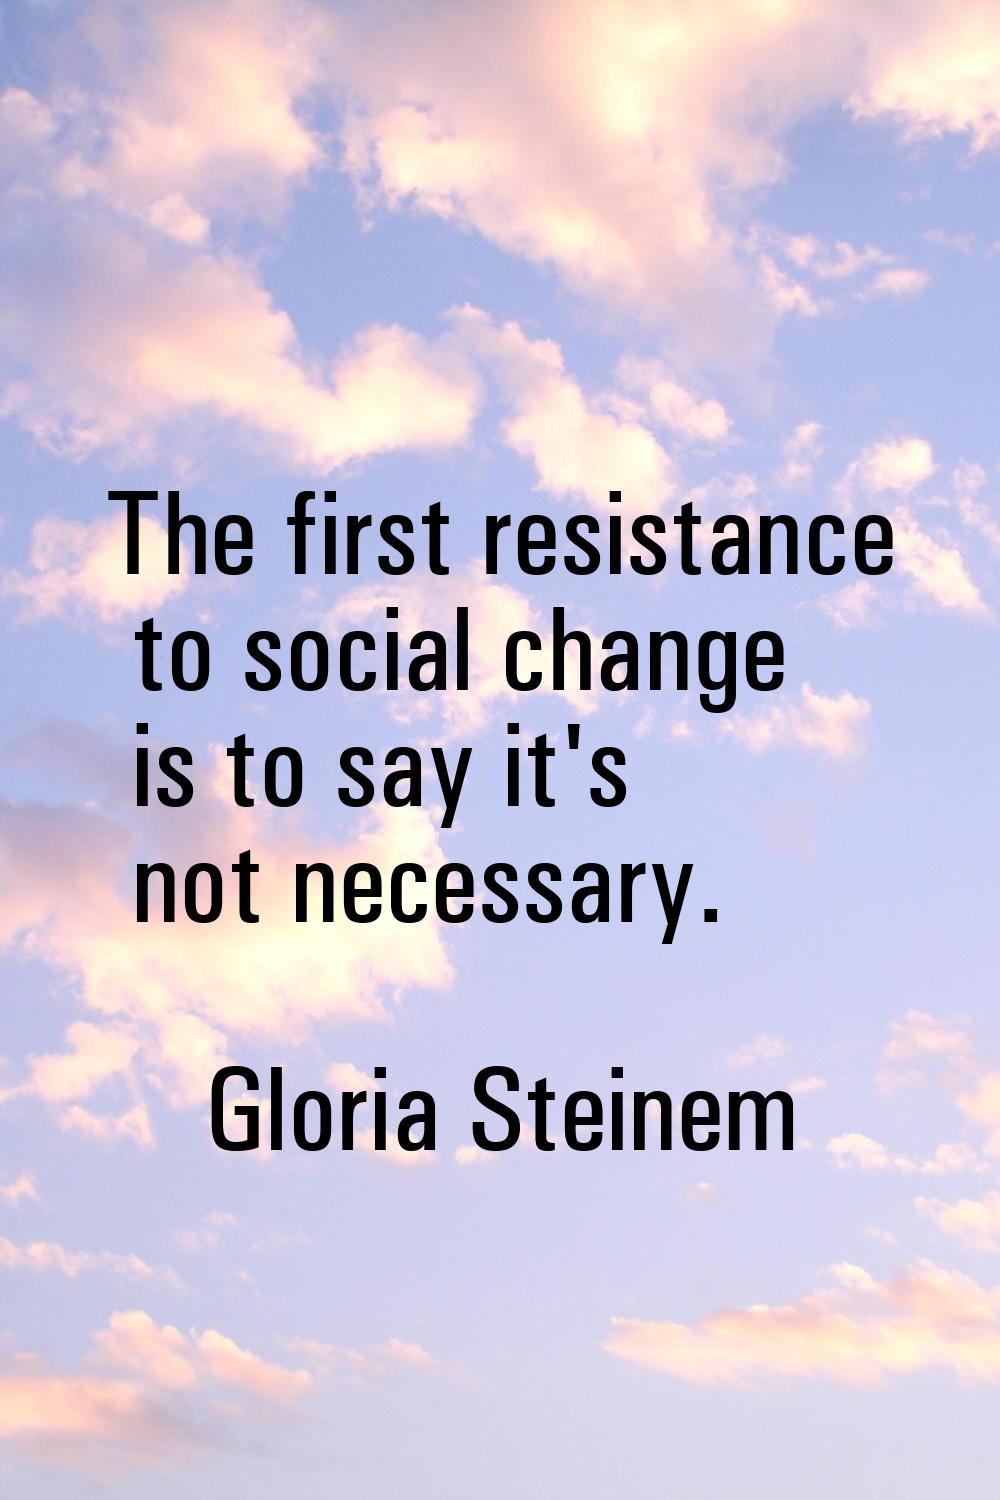 The first resistance to social change is to say it's not necessary.